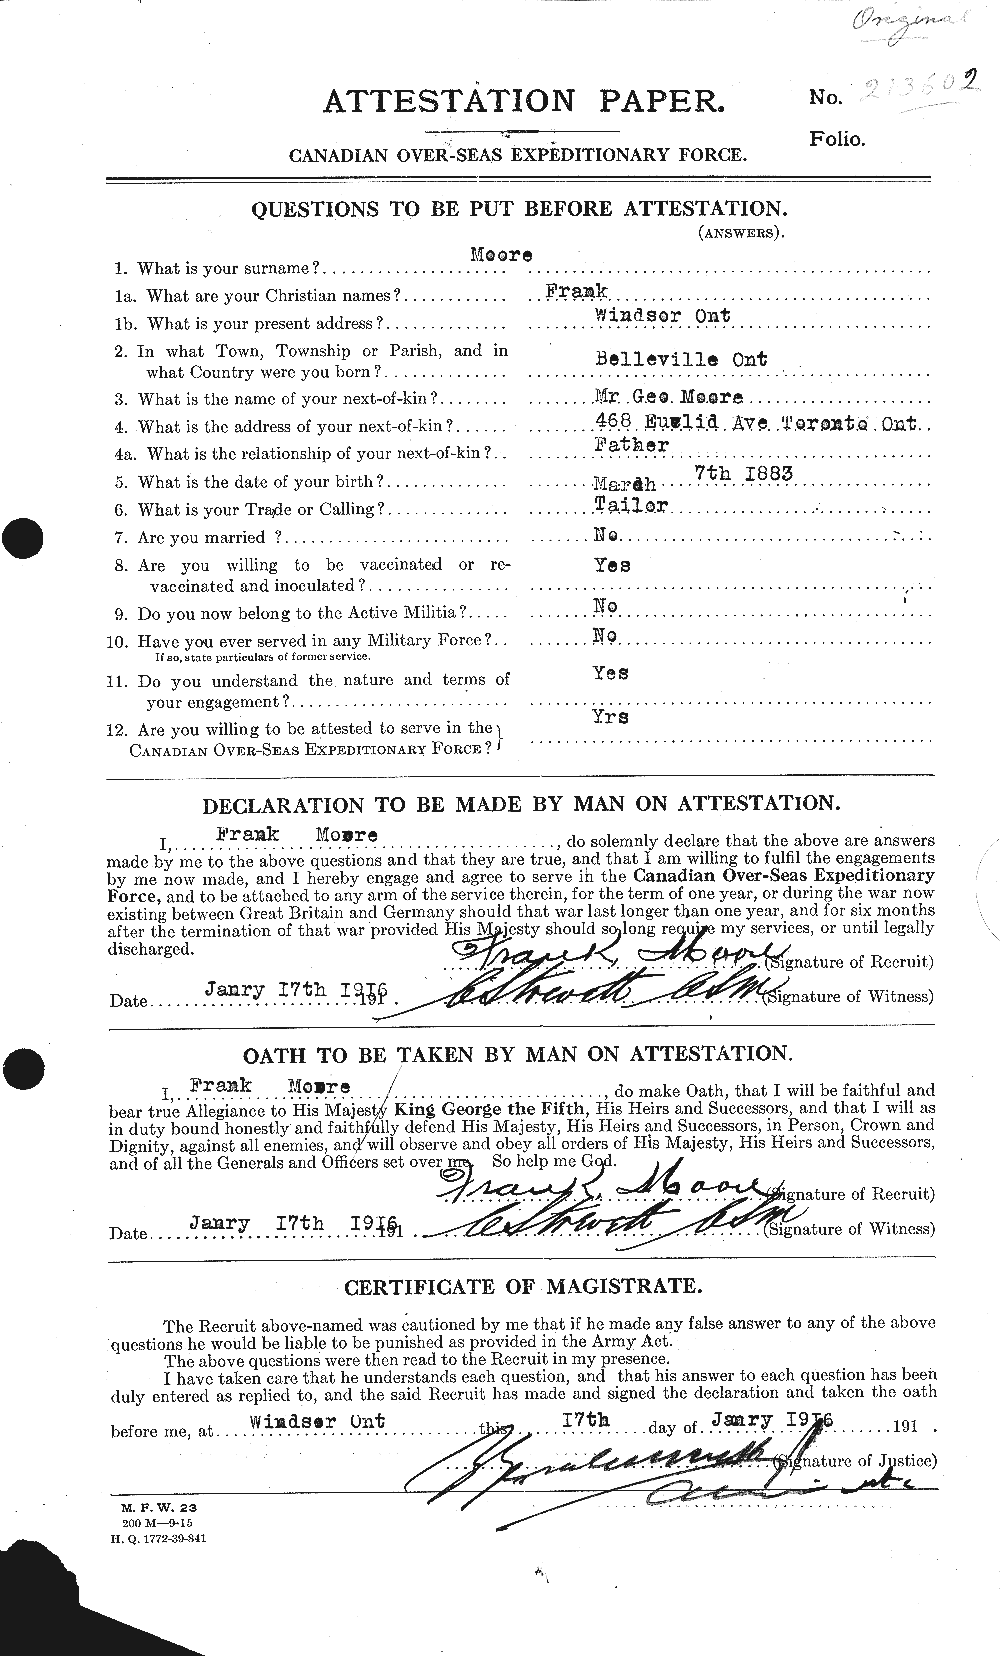 Personnel Records of the First World War - CEF 506695a